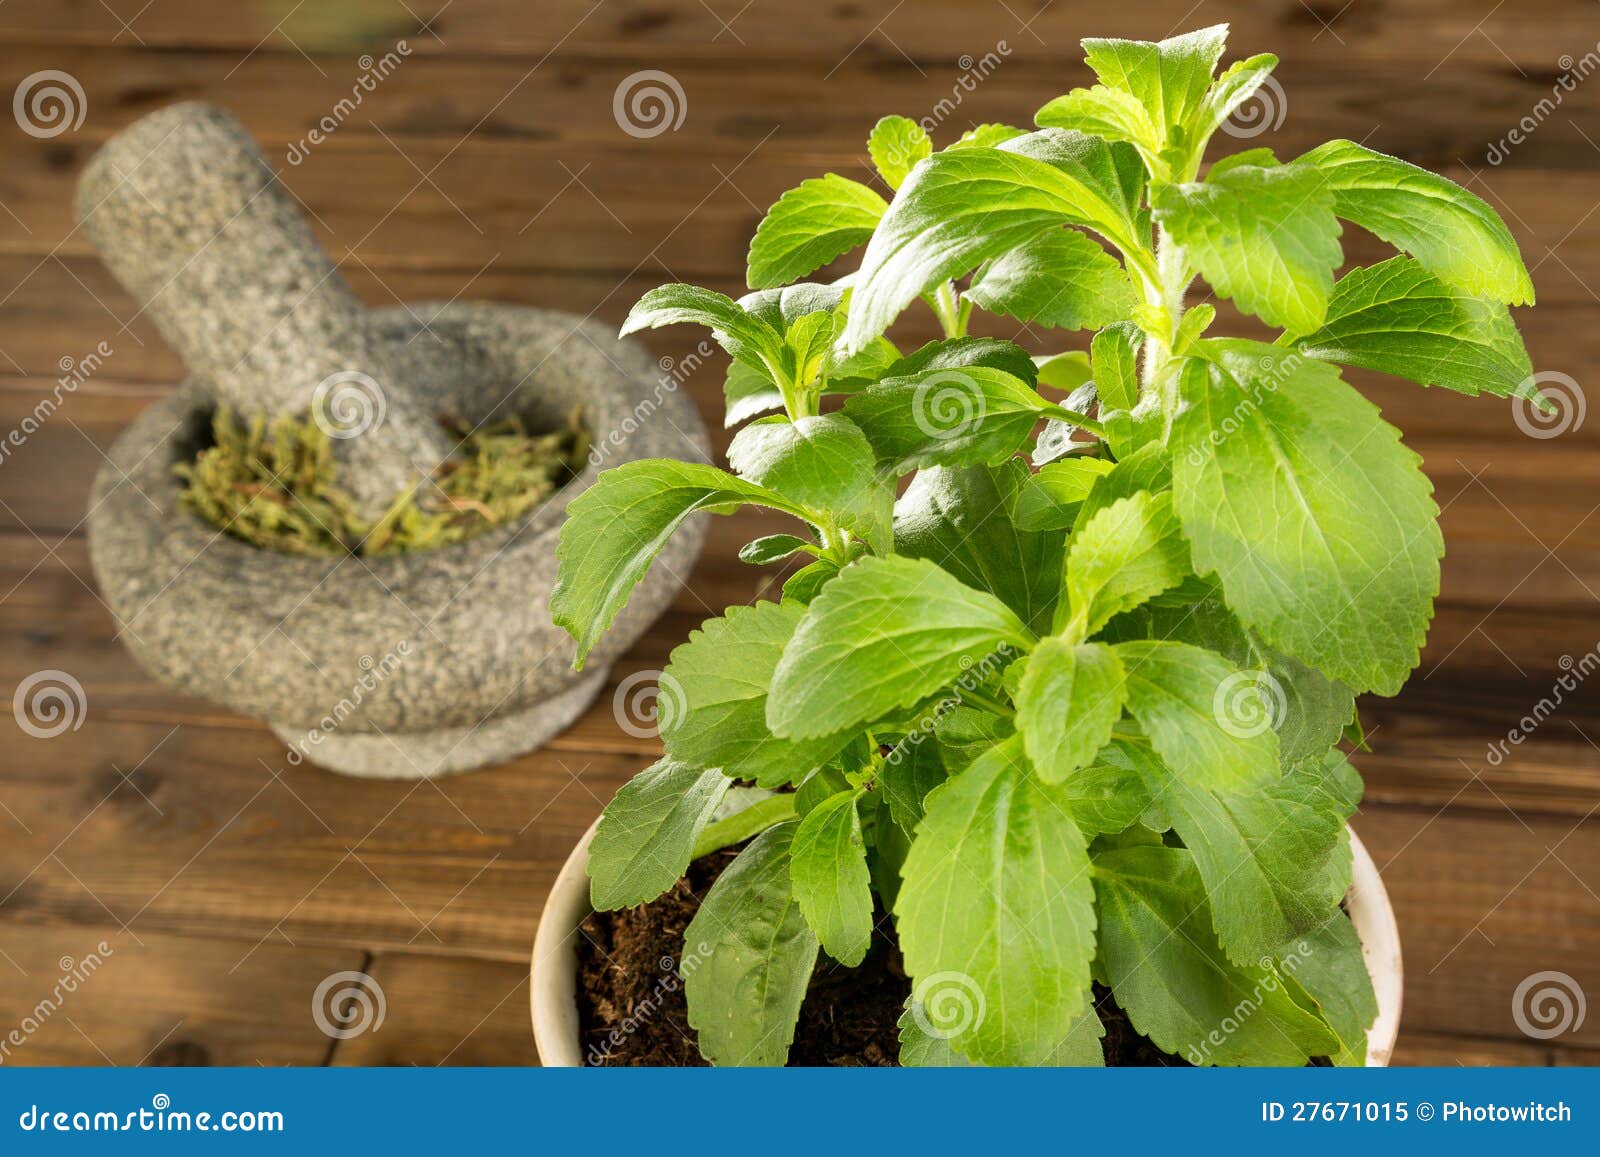 potted stevia plant